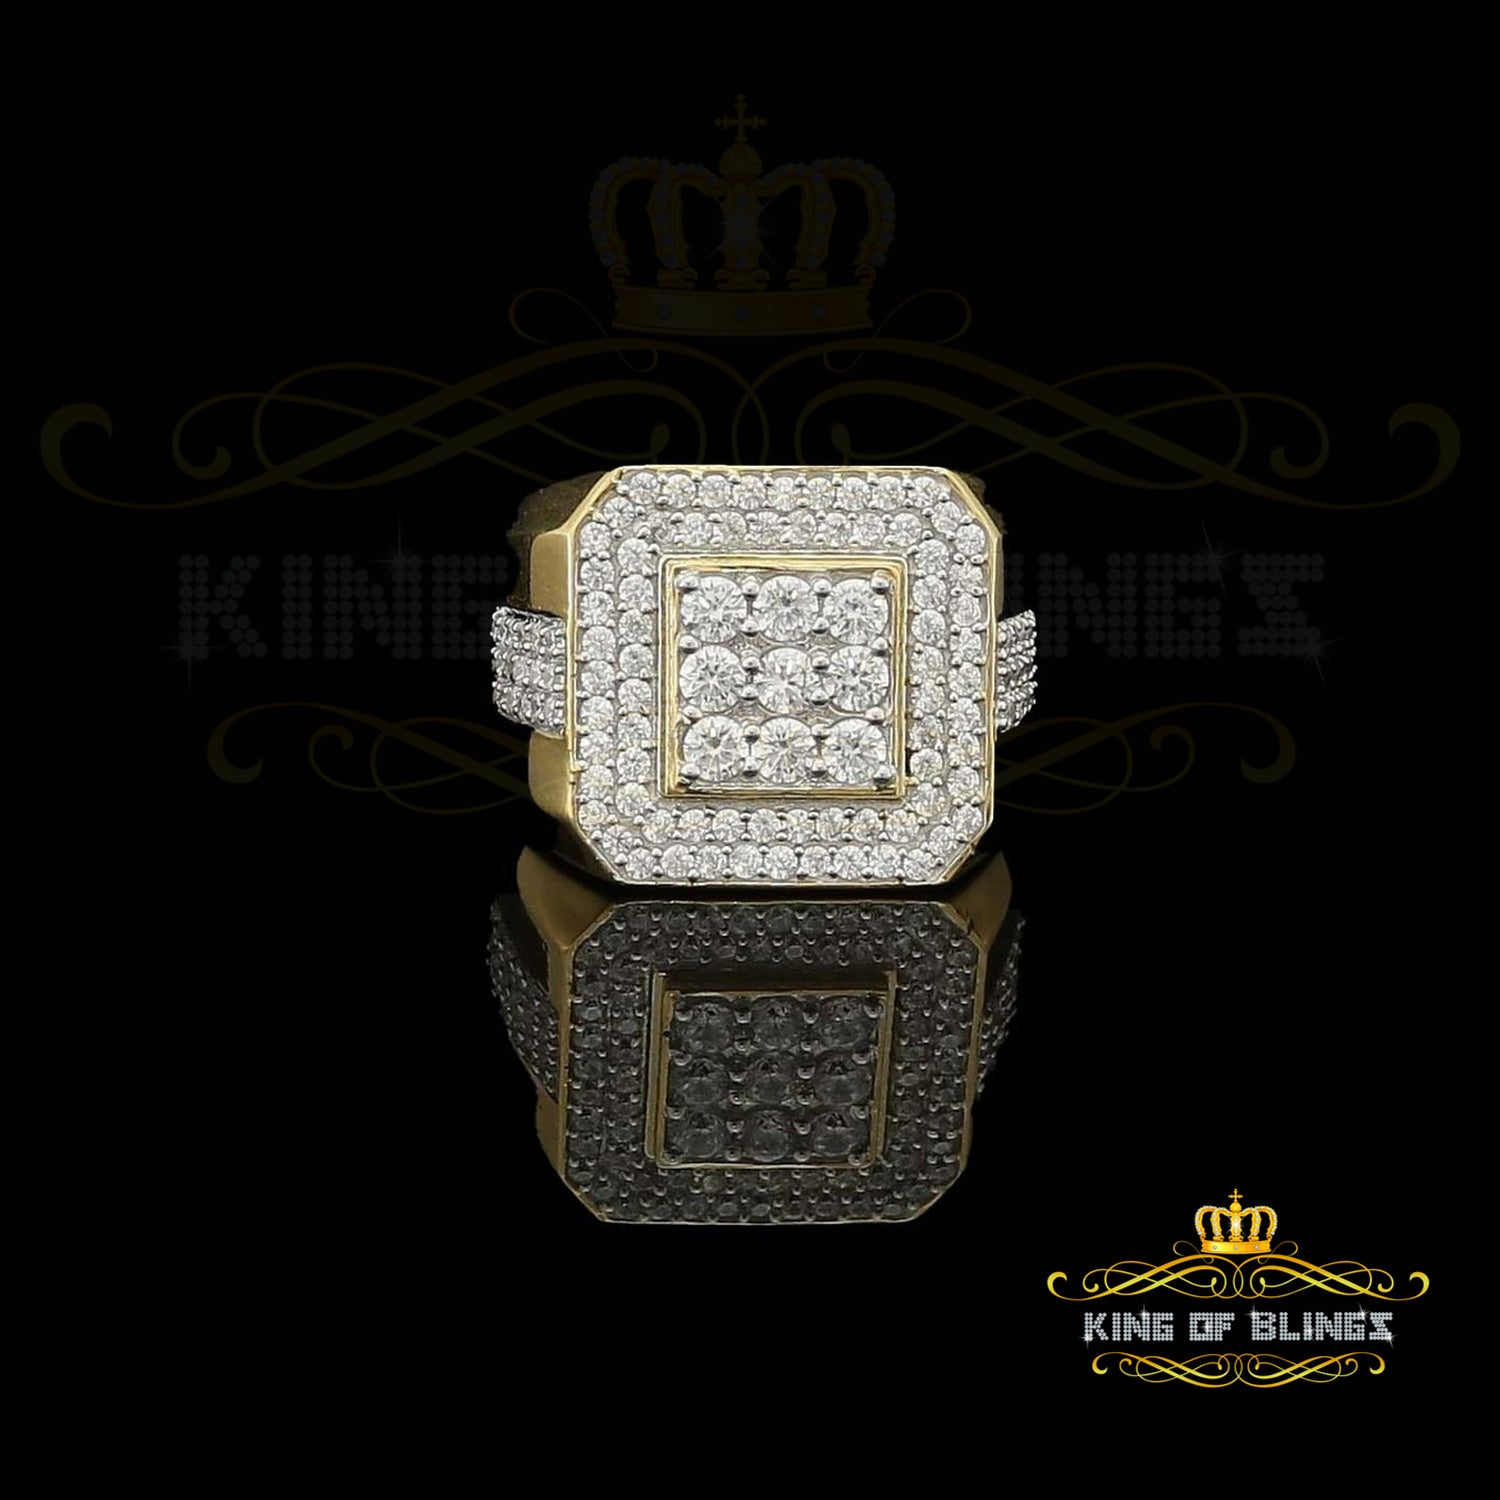 King Of Bling's 925 Silver Yellow Square 3.50ct Cubic Zirconia Men's Adjustable Ring Size 10 to 12 KING OF BLINGS